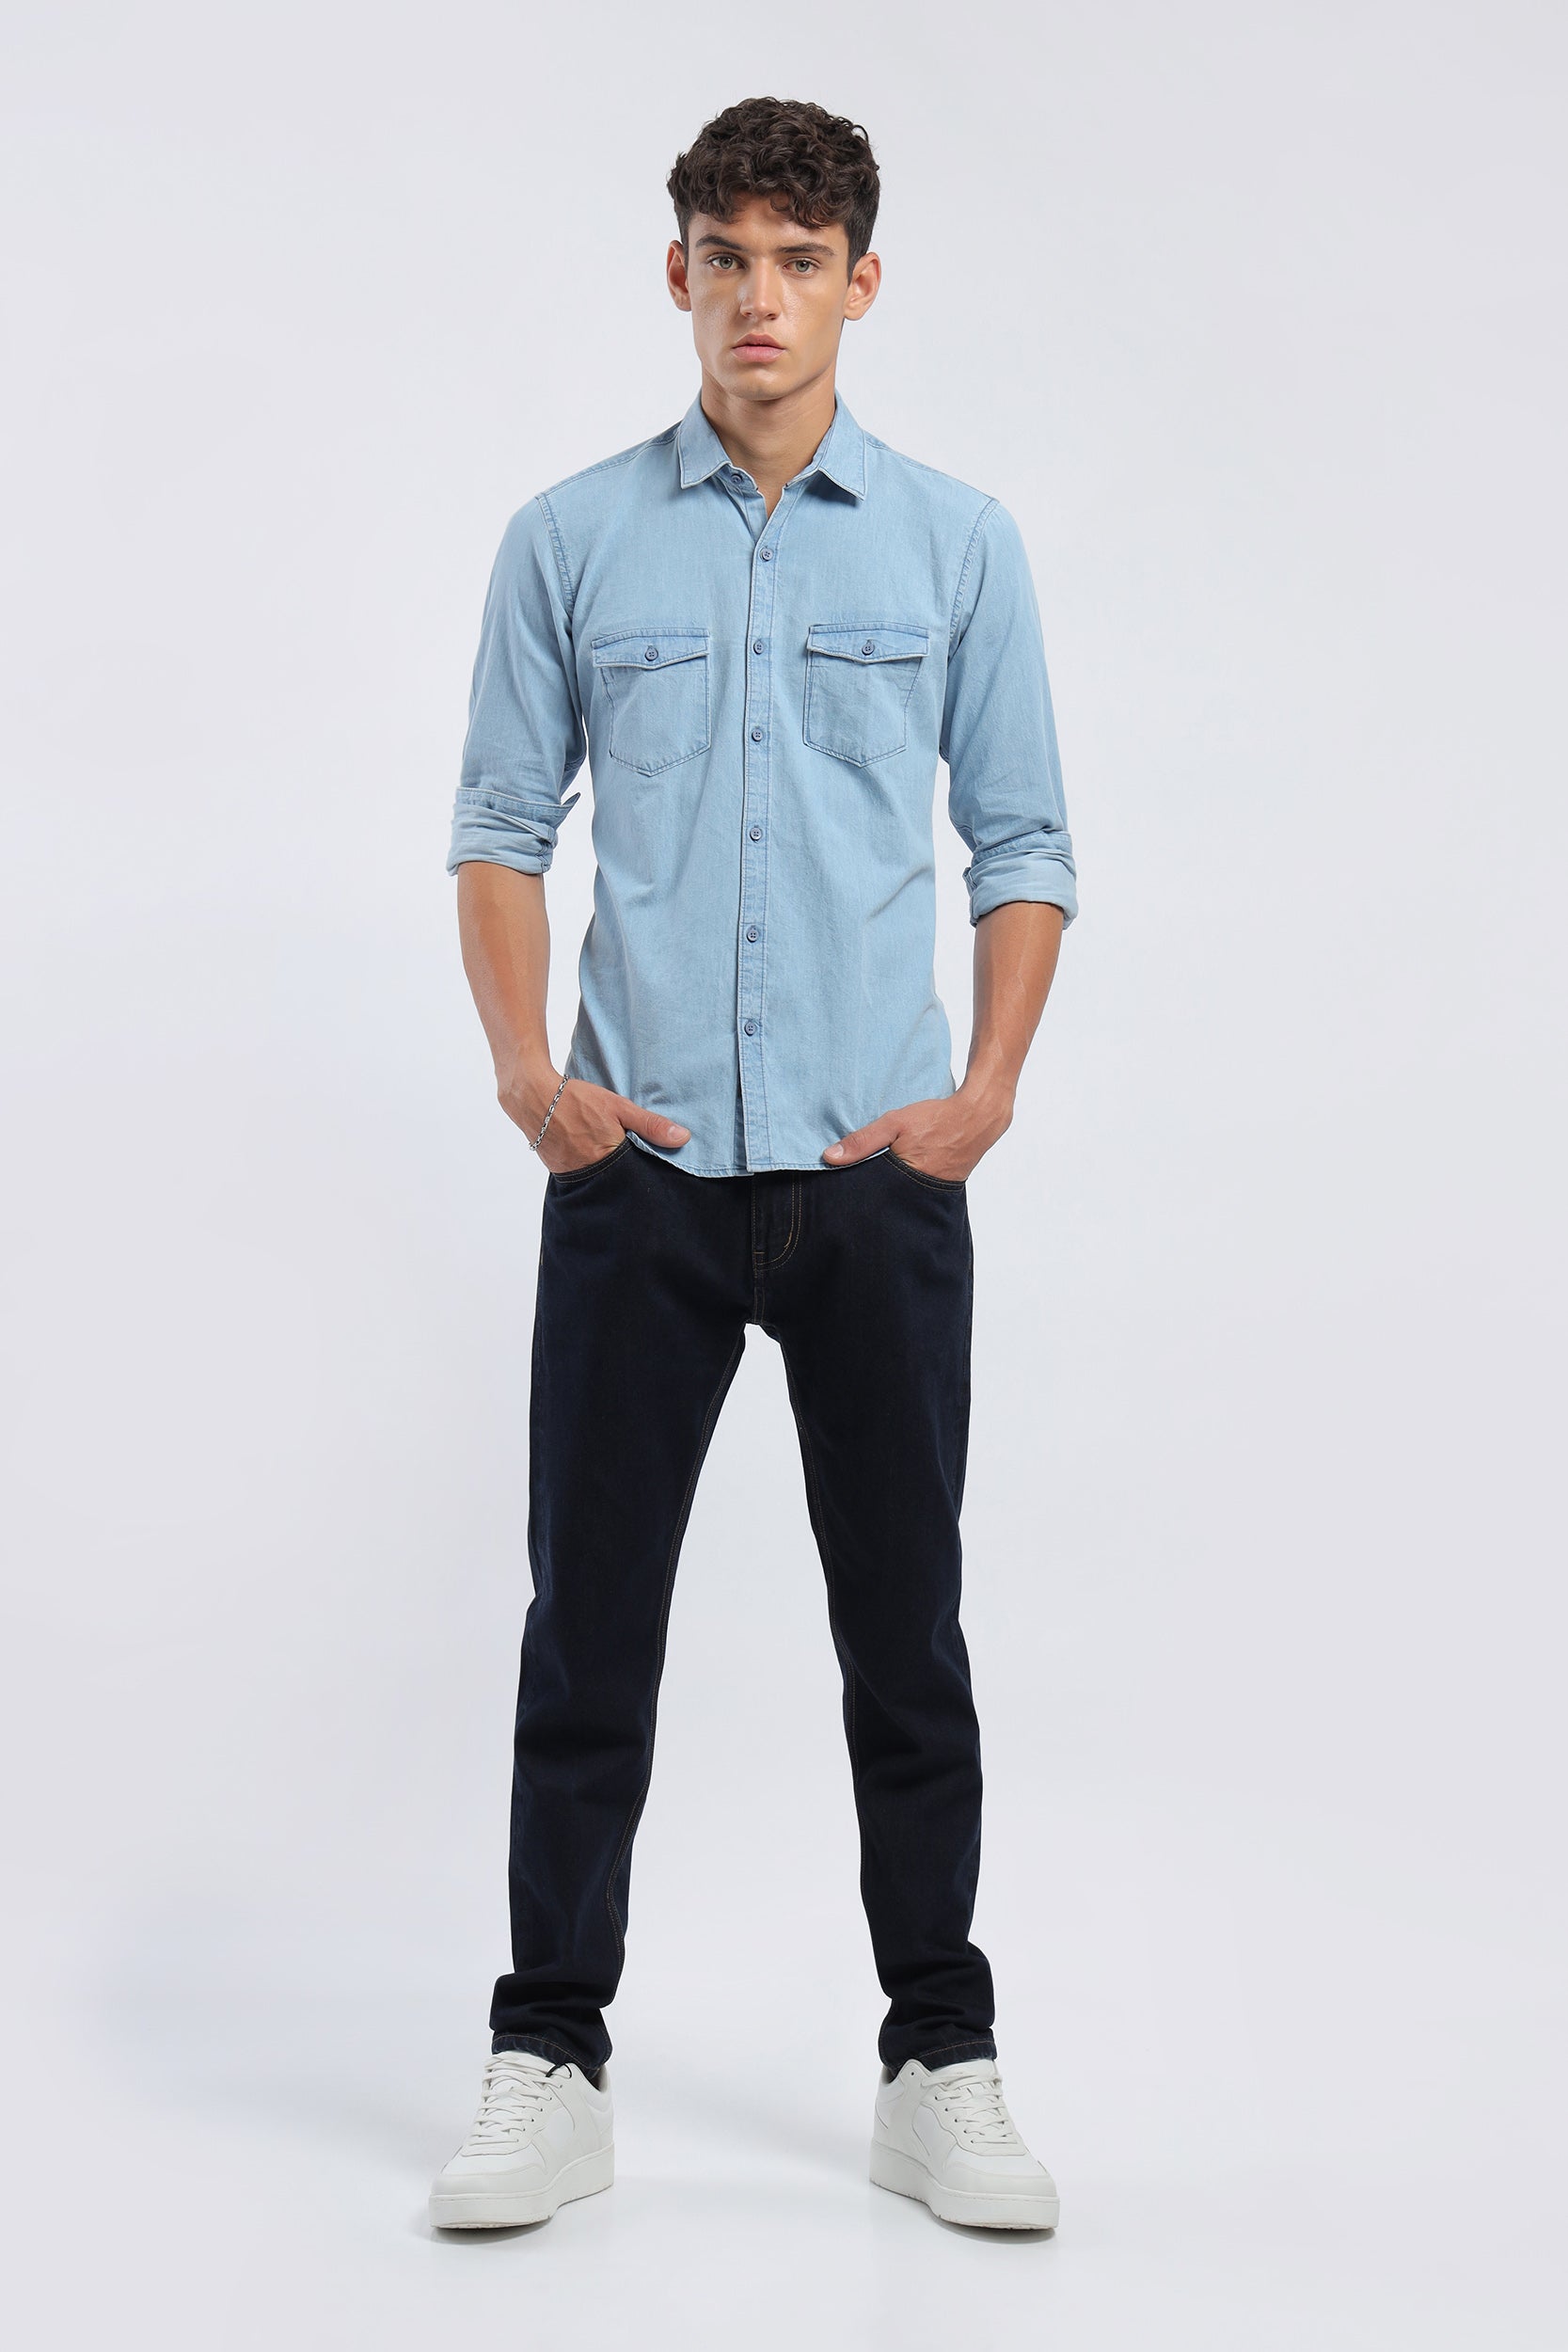 Check styling ideas for「Linen Blend Volume Short Sleeve Shirt、Denim Wide  Straight Cargo Pants」| UNIQLO IN